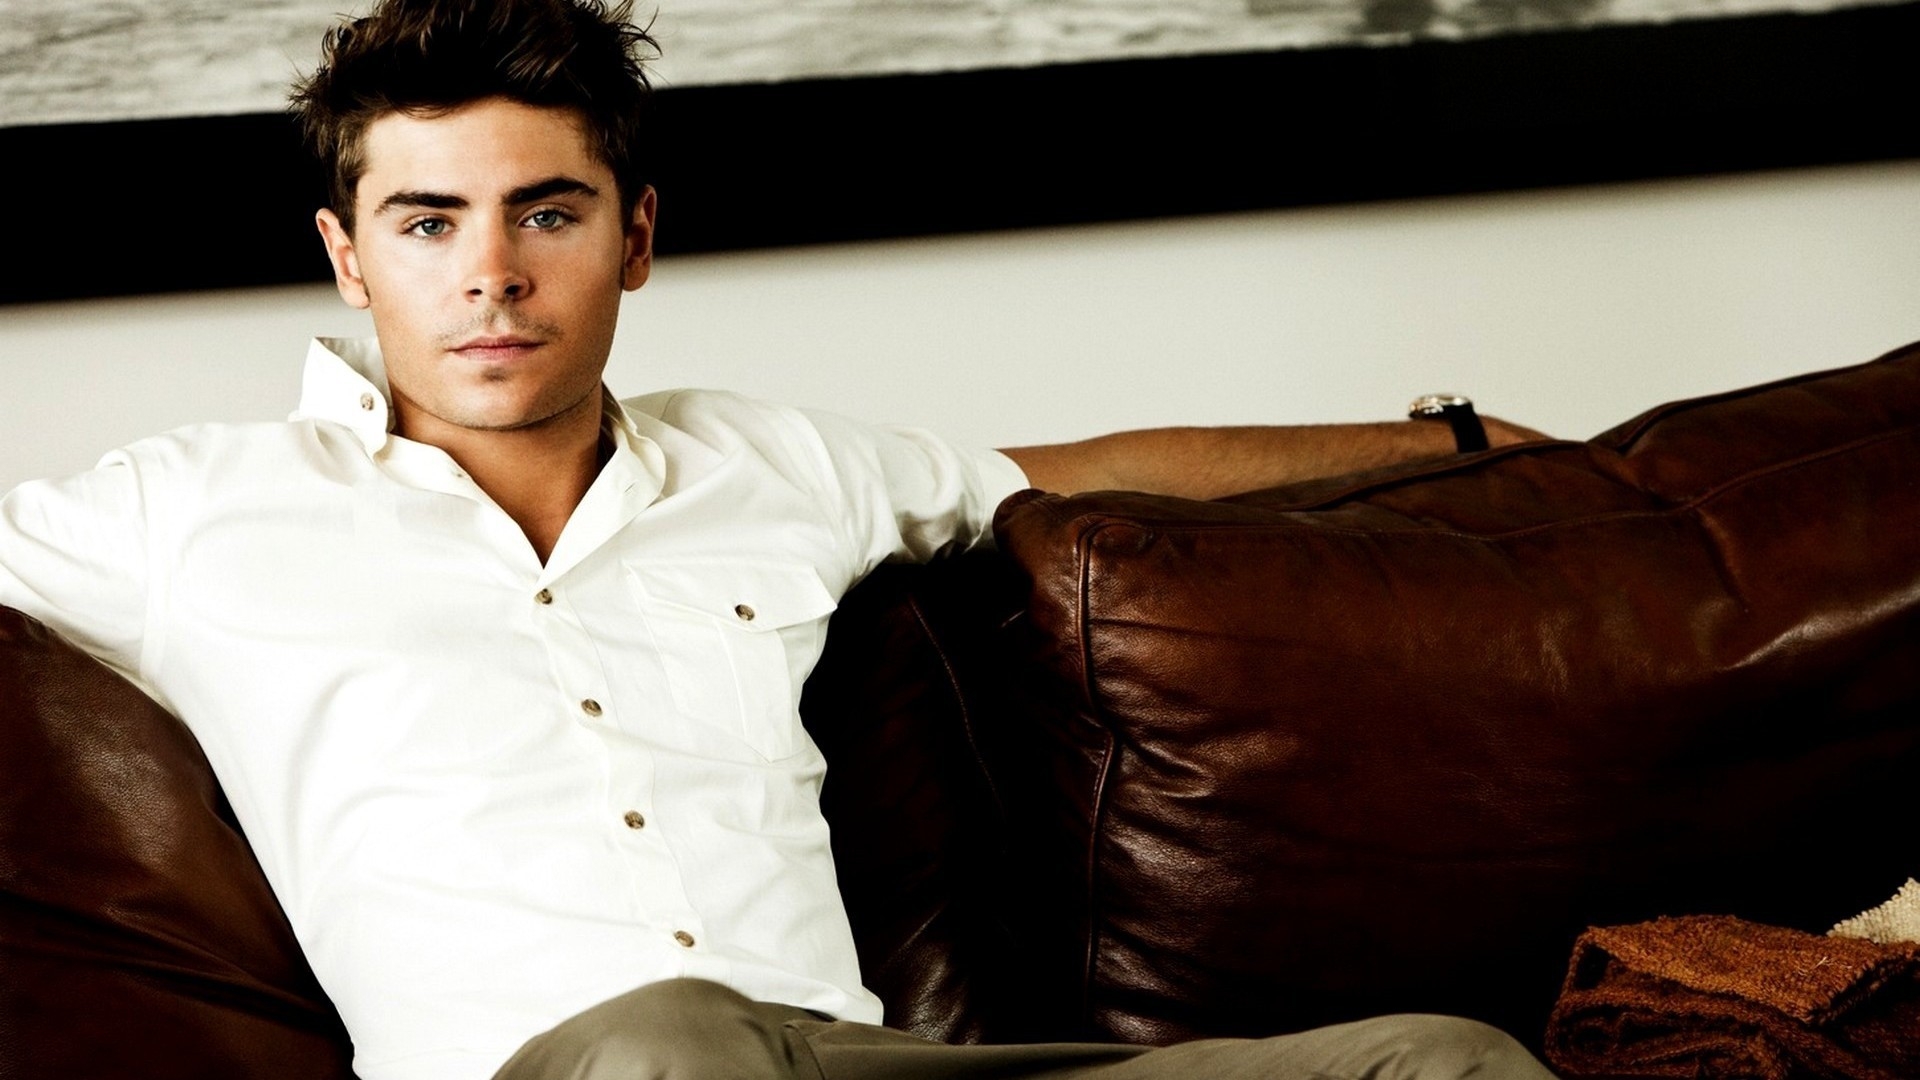 Zac Efron Cool Look for 1920 x 1080 HDTV 1080p resolution